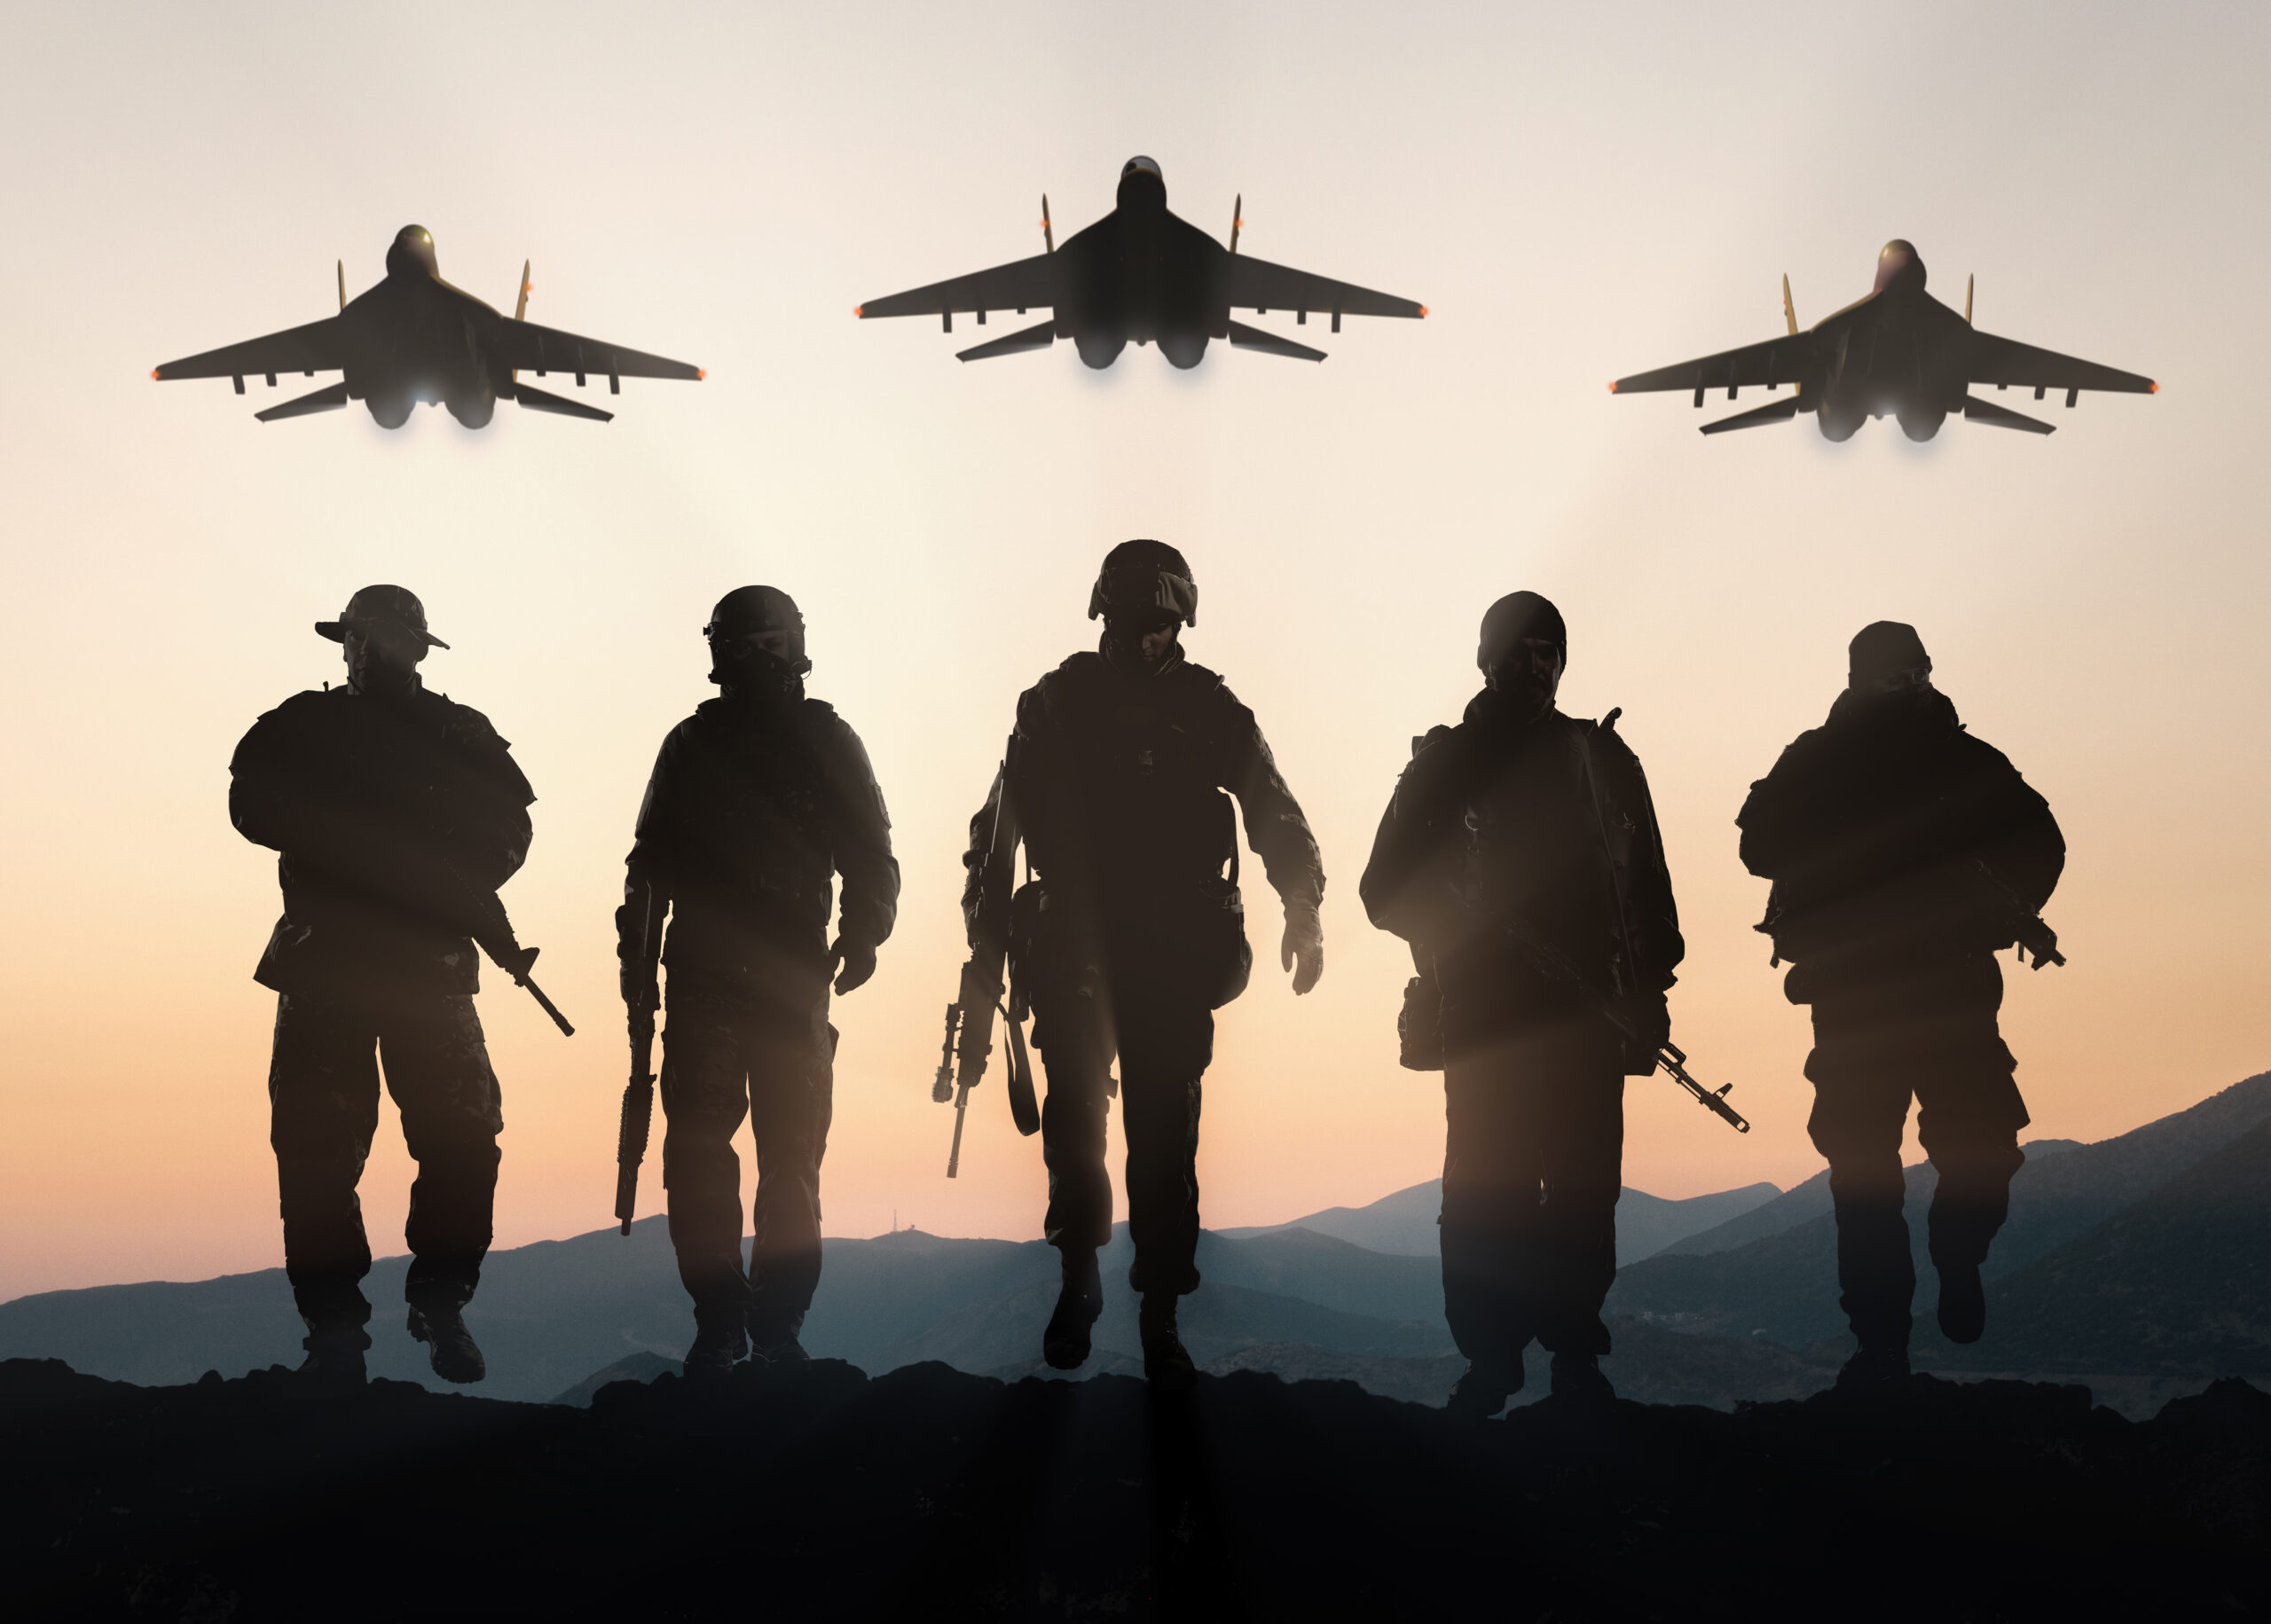 Military,Silhouettes,Of,Soldiers,And,Airforce,Against,The,Backdrop,Of